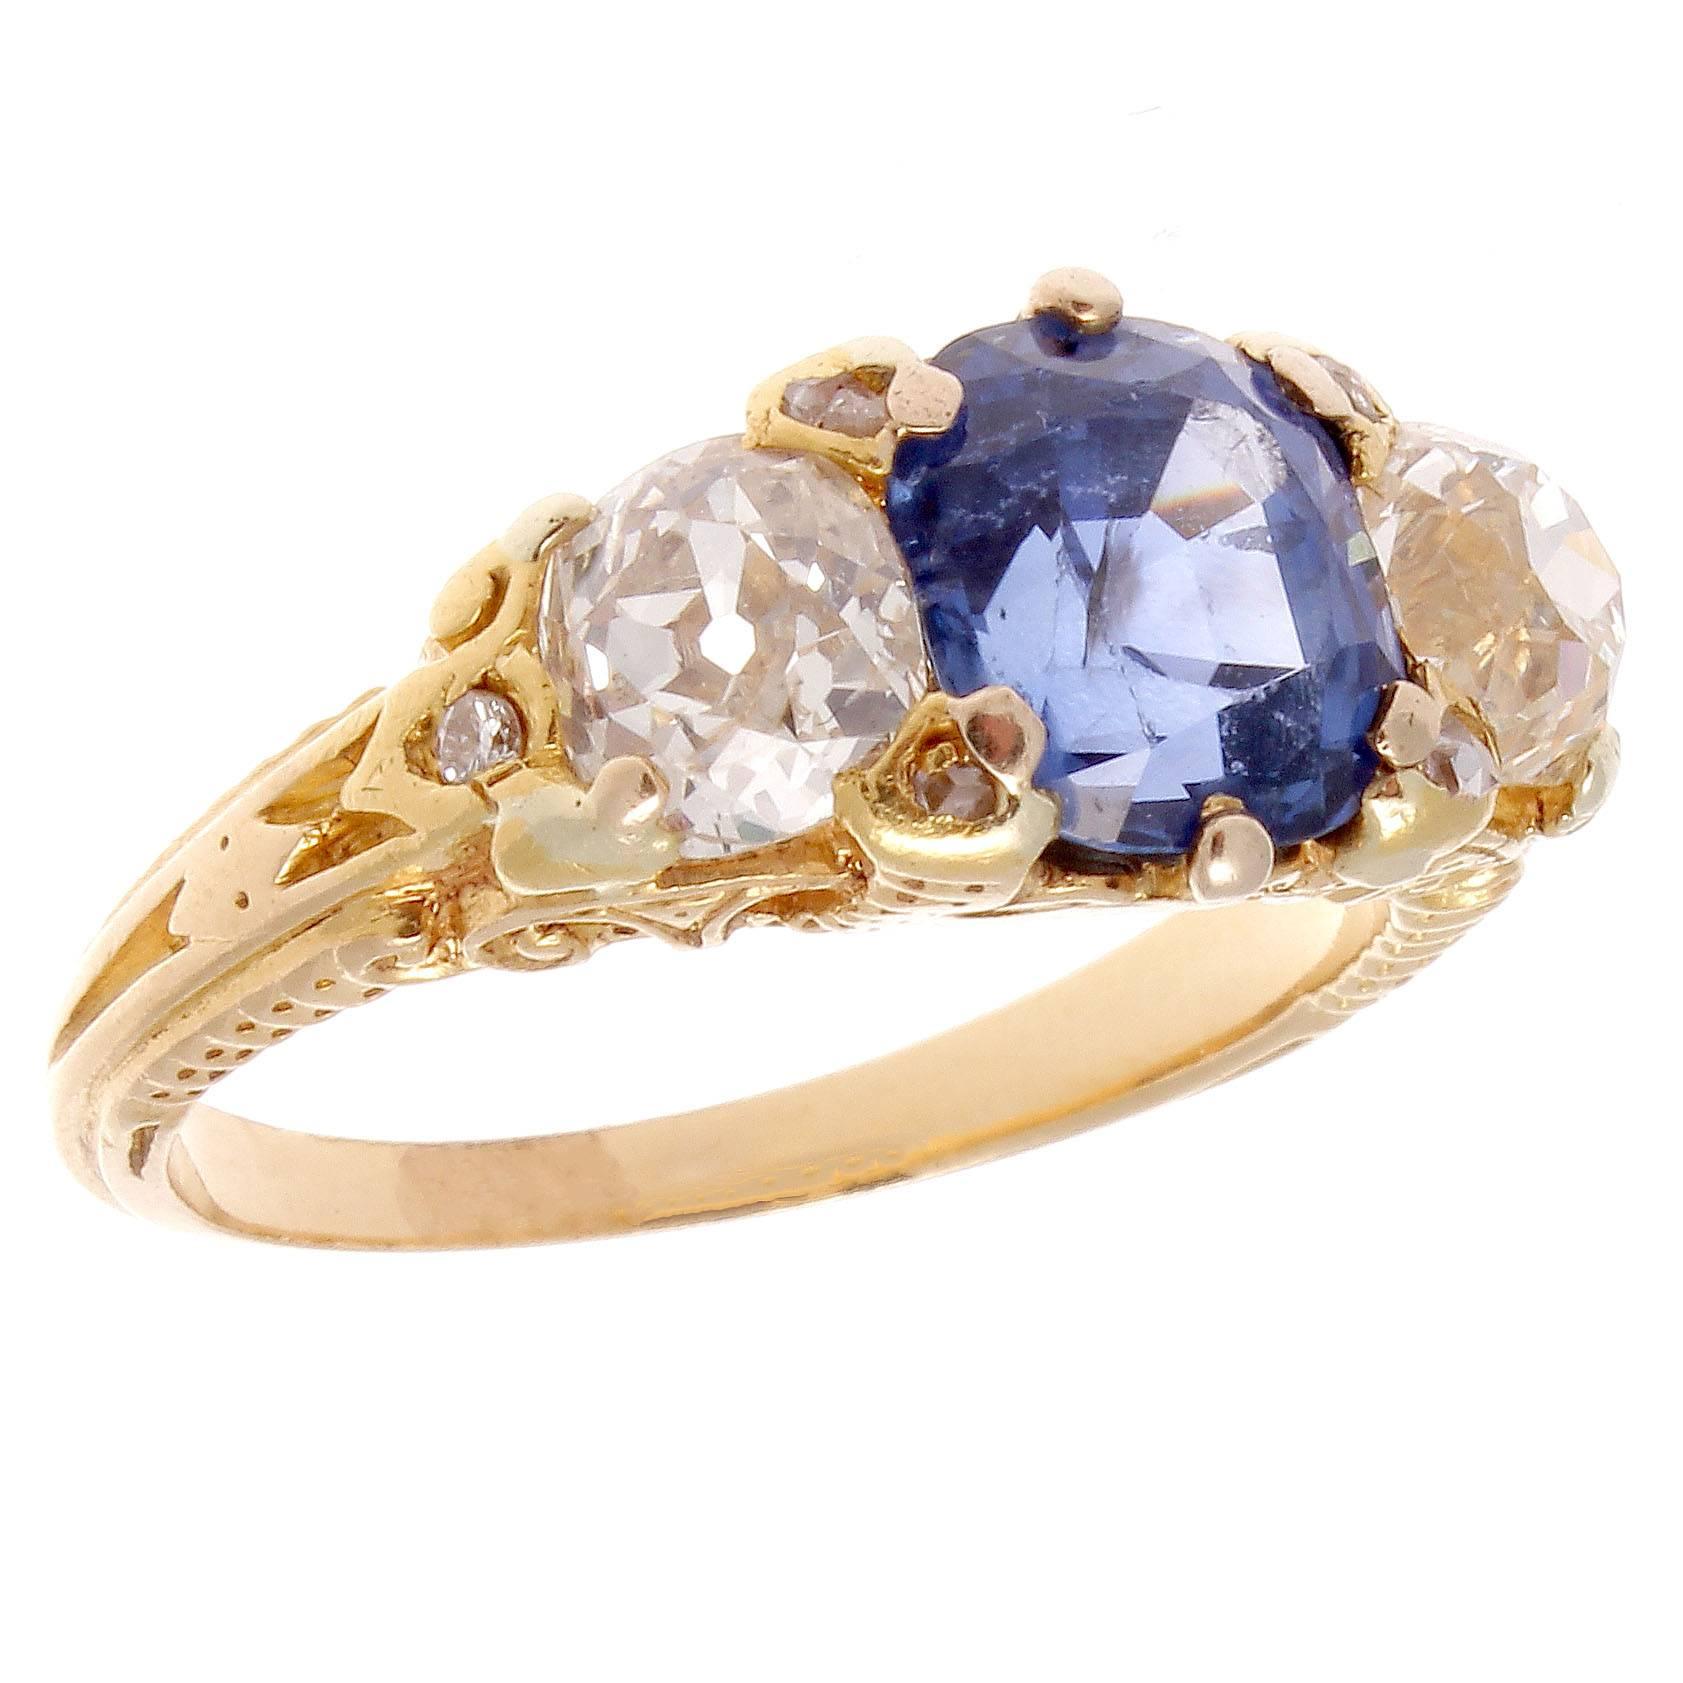 From the attention to detail and hand engravings this type of craftsmanship from the Victorian into the art deco time periods is still yet to be matched. This classic three stone ring highlights the center cornflower blue Ceylon no heat sapphire